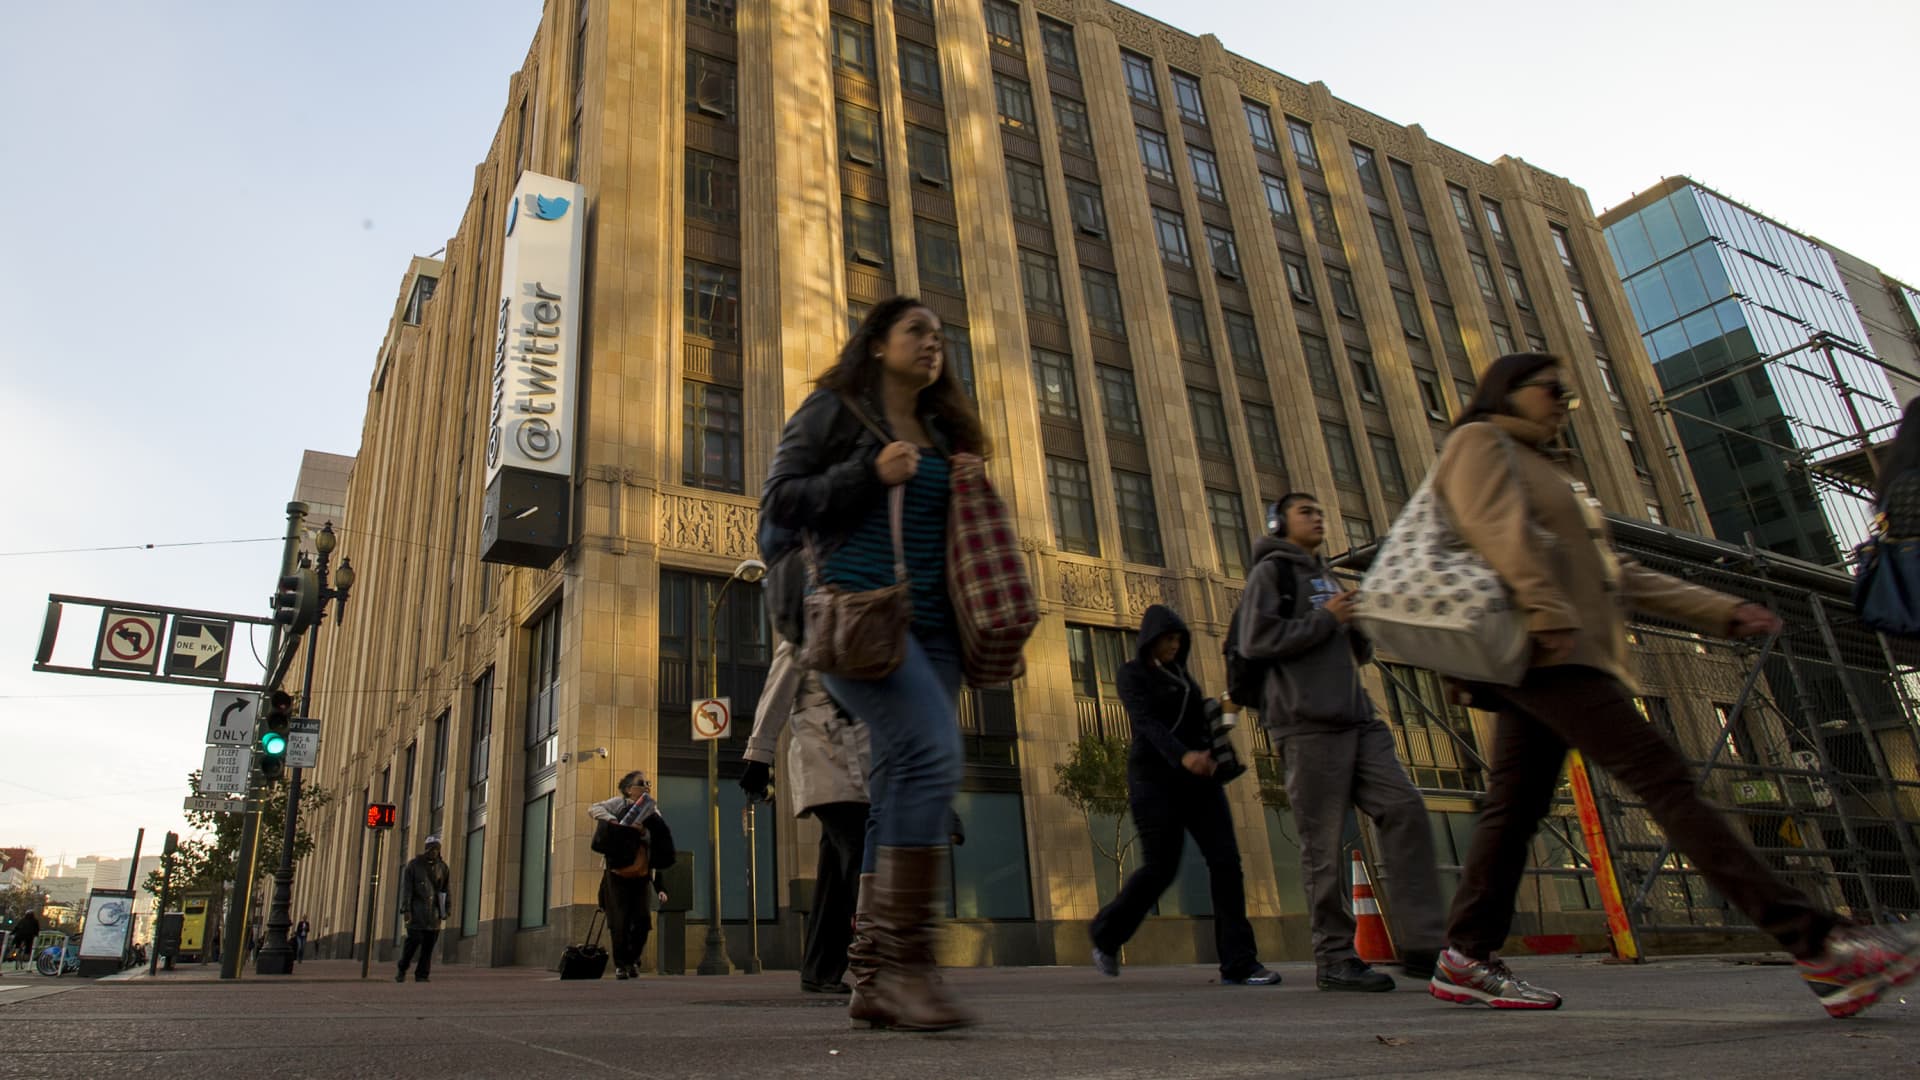 Twitter reportedly hasn't paid rent on its office spaces for weeks